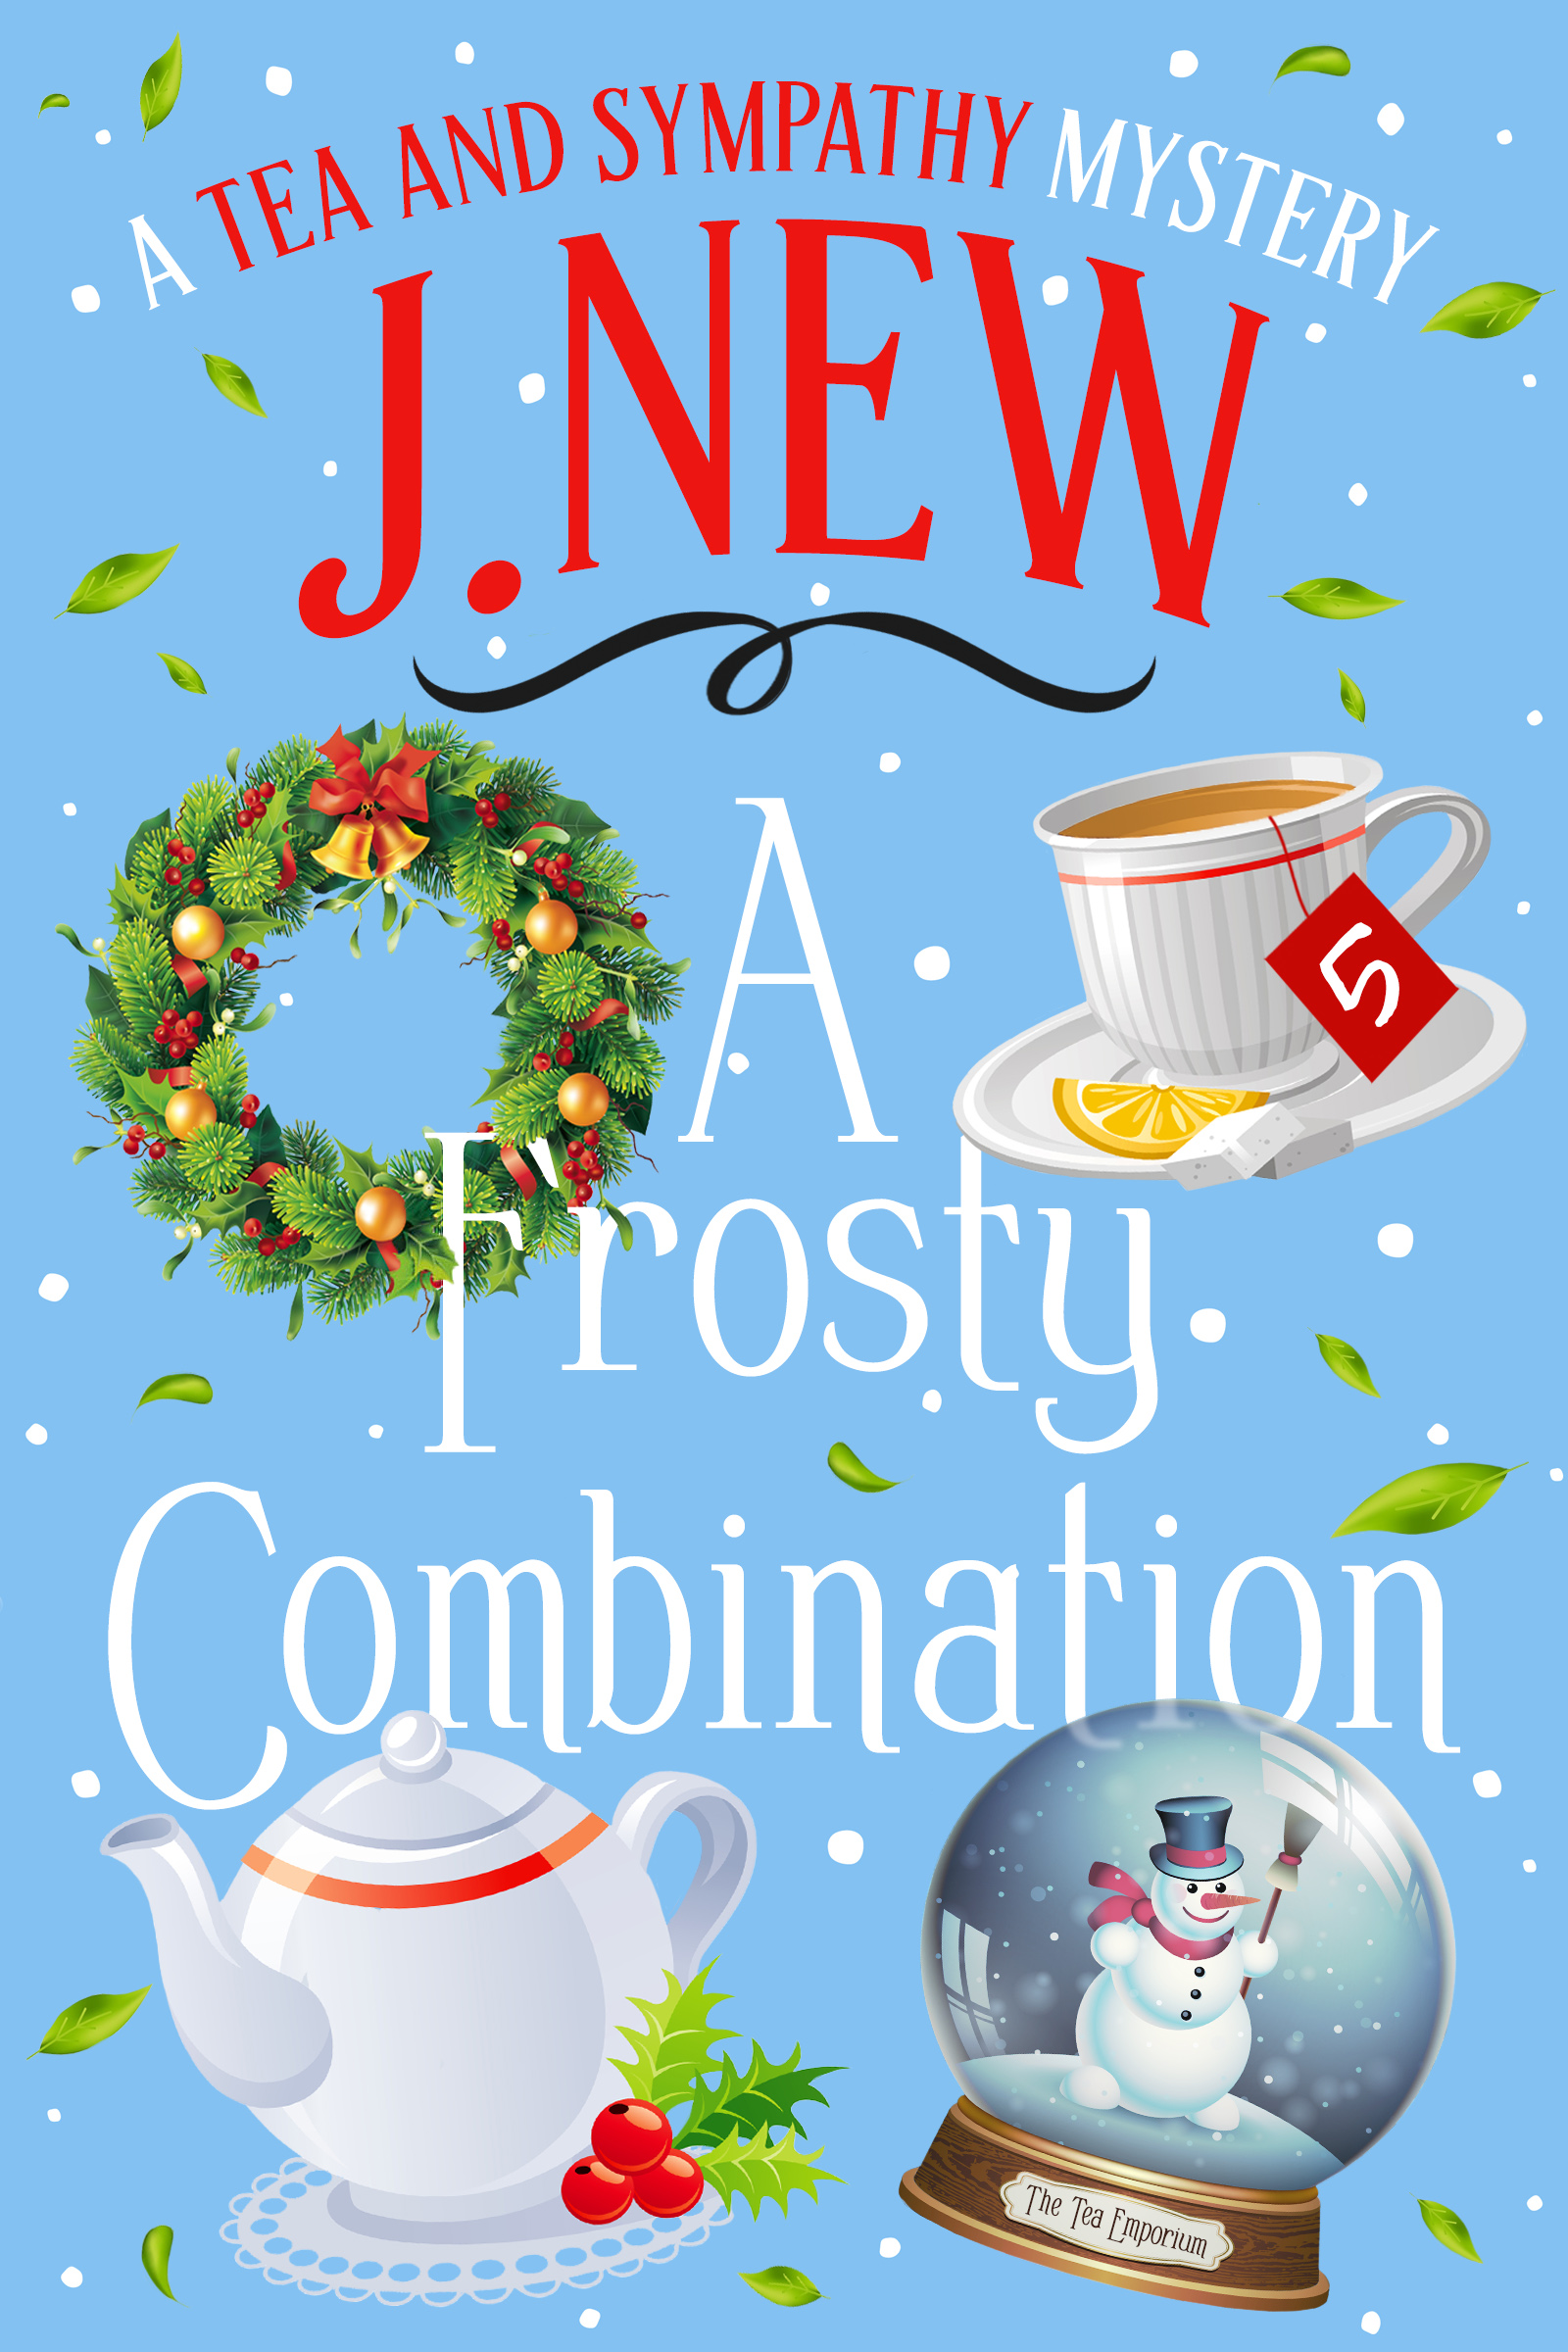 A Frosty Combination is the popular fifth book in the British cozy culinary mystery series by author J. New